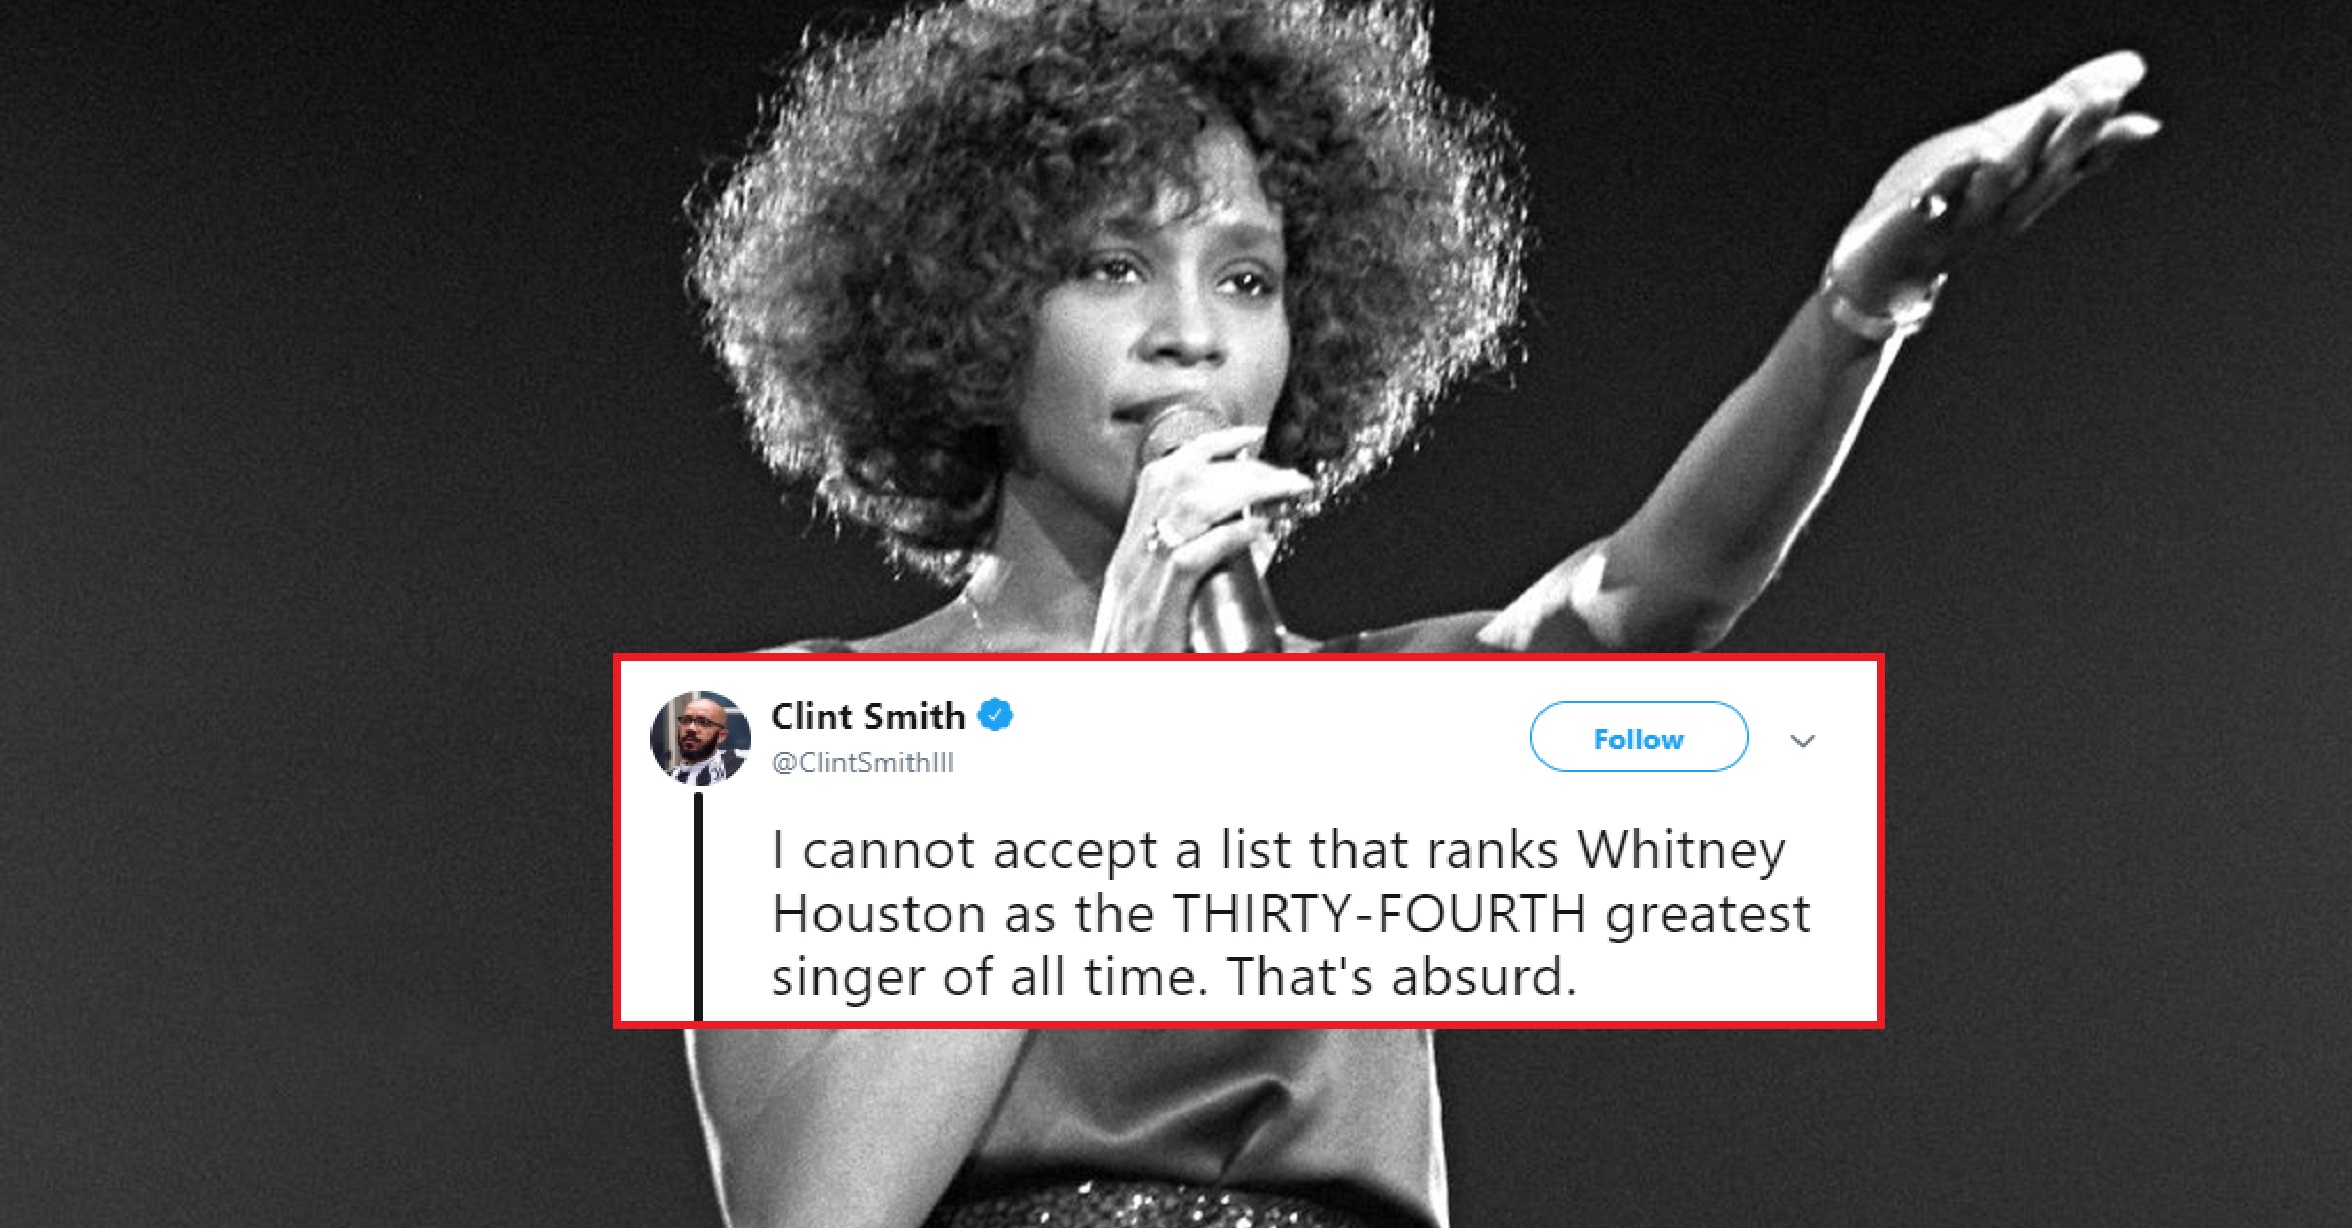 Rolling Stones Mag Faces Wrath Over Decade-Old ‘Greatest Singers’ List, Twitter Demands ‘Whitney Houston Be Placed Higher’